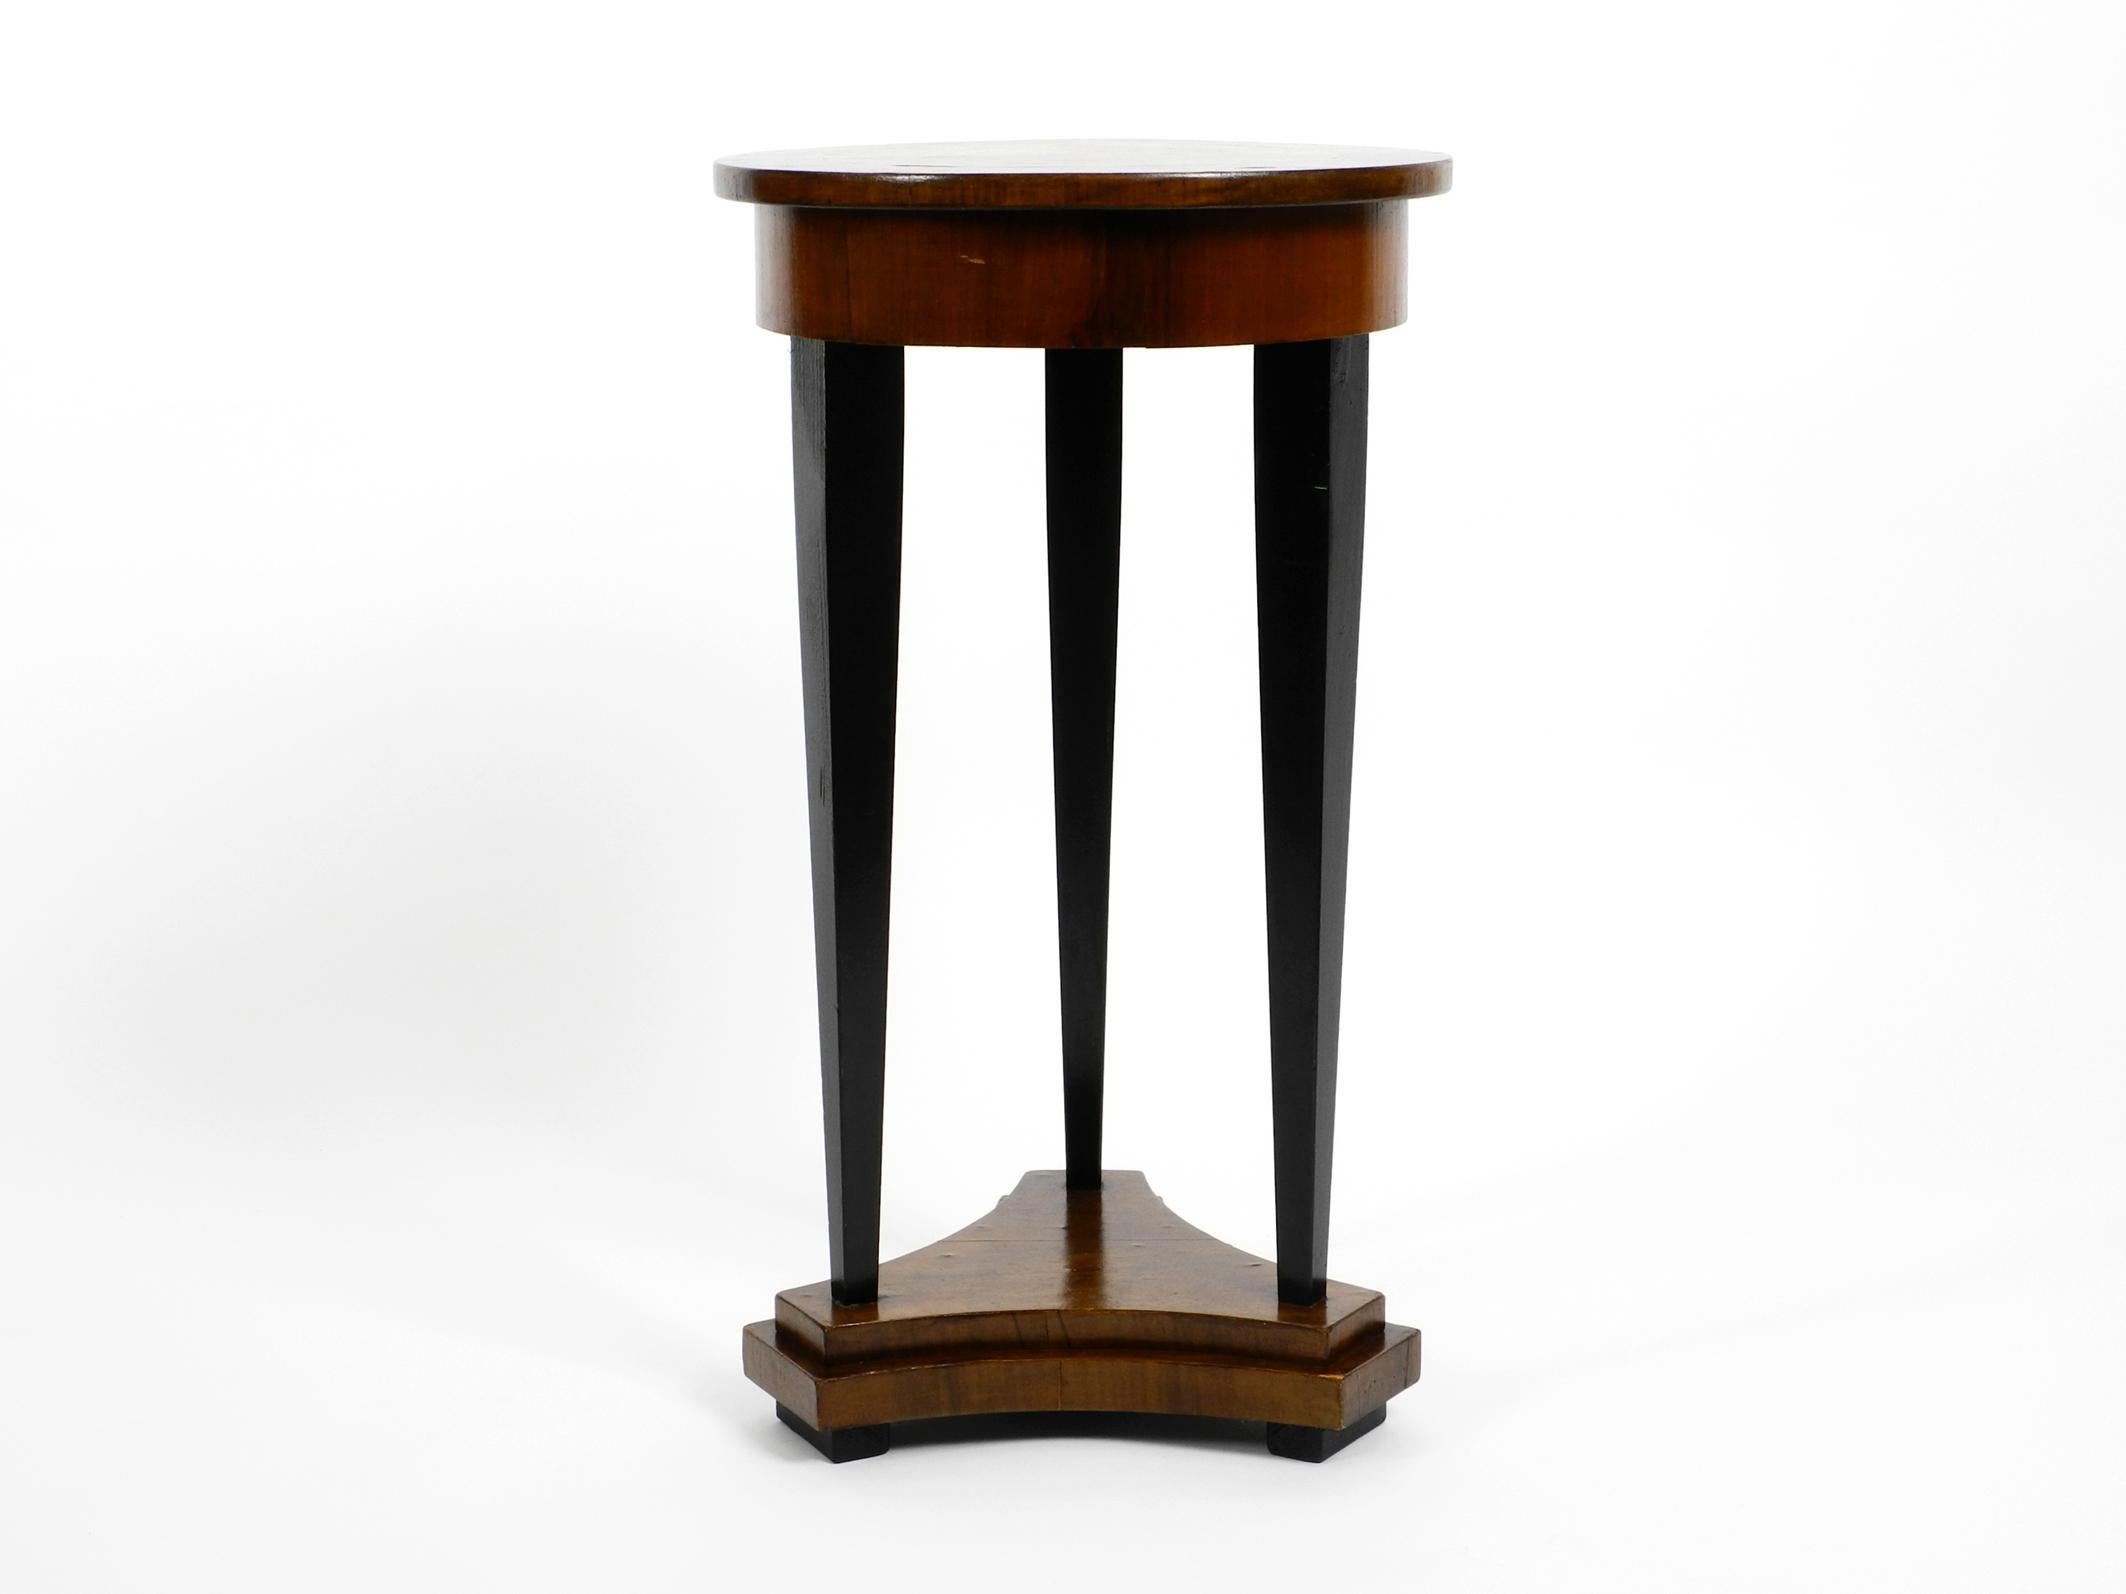 Beautiful, very high quality Italian 1930s Art Deco side or flower table.
Made from solid wood and walnut veneer. Legs painted in black.
A round black Fine inlay is inserted on the table top.
Very clean, odorless and without any damages.